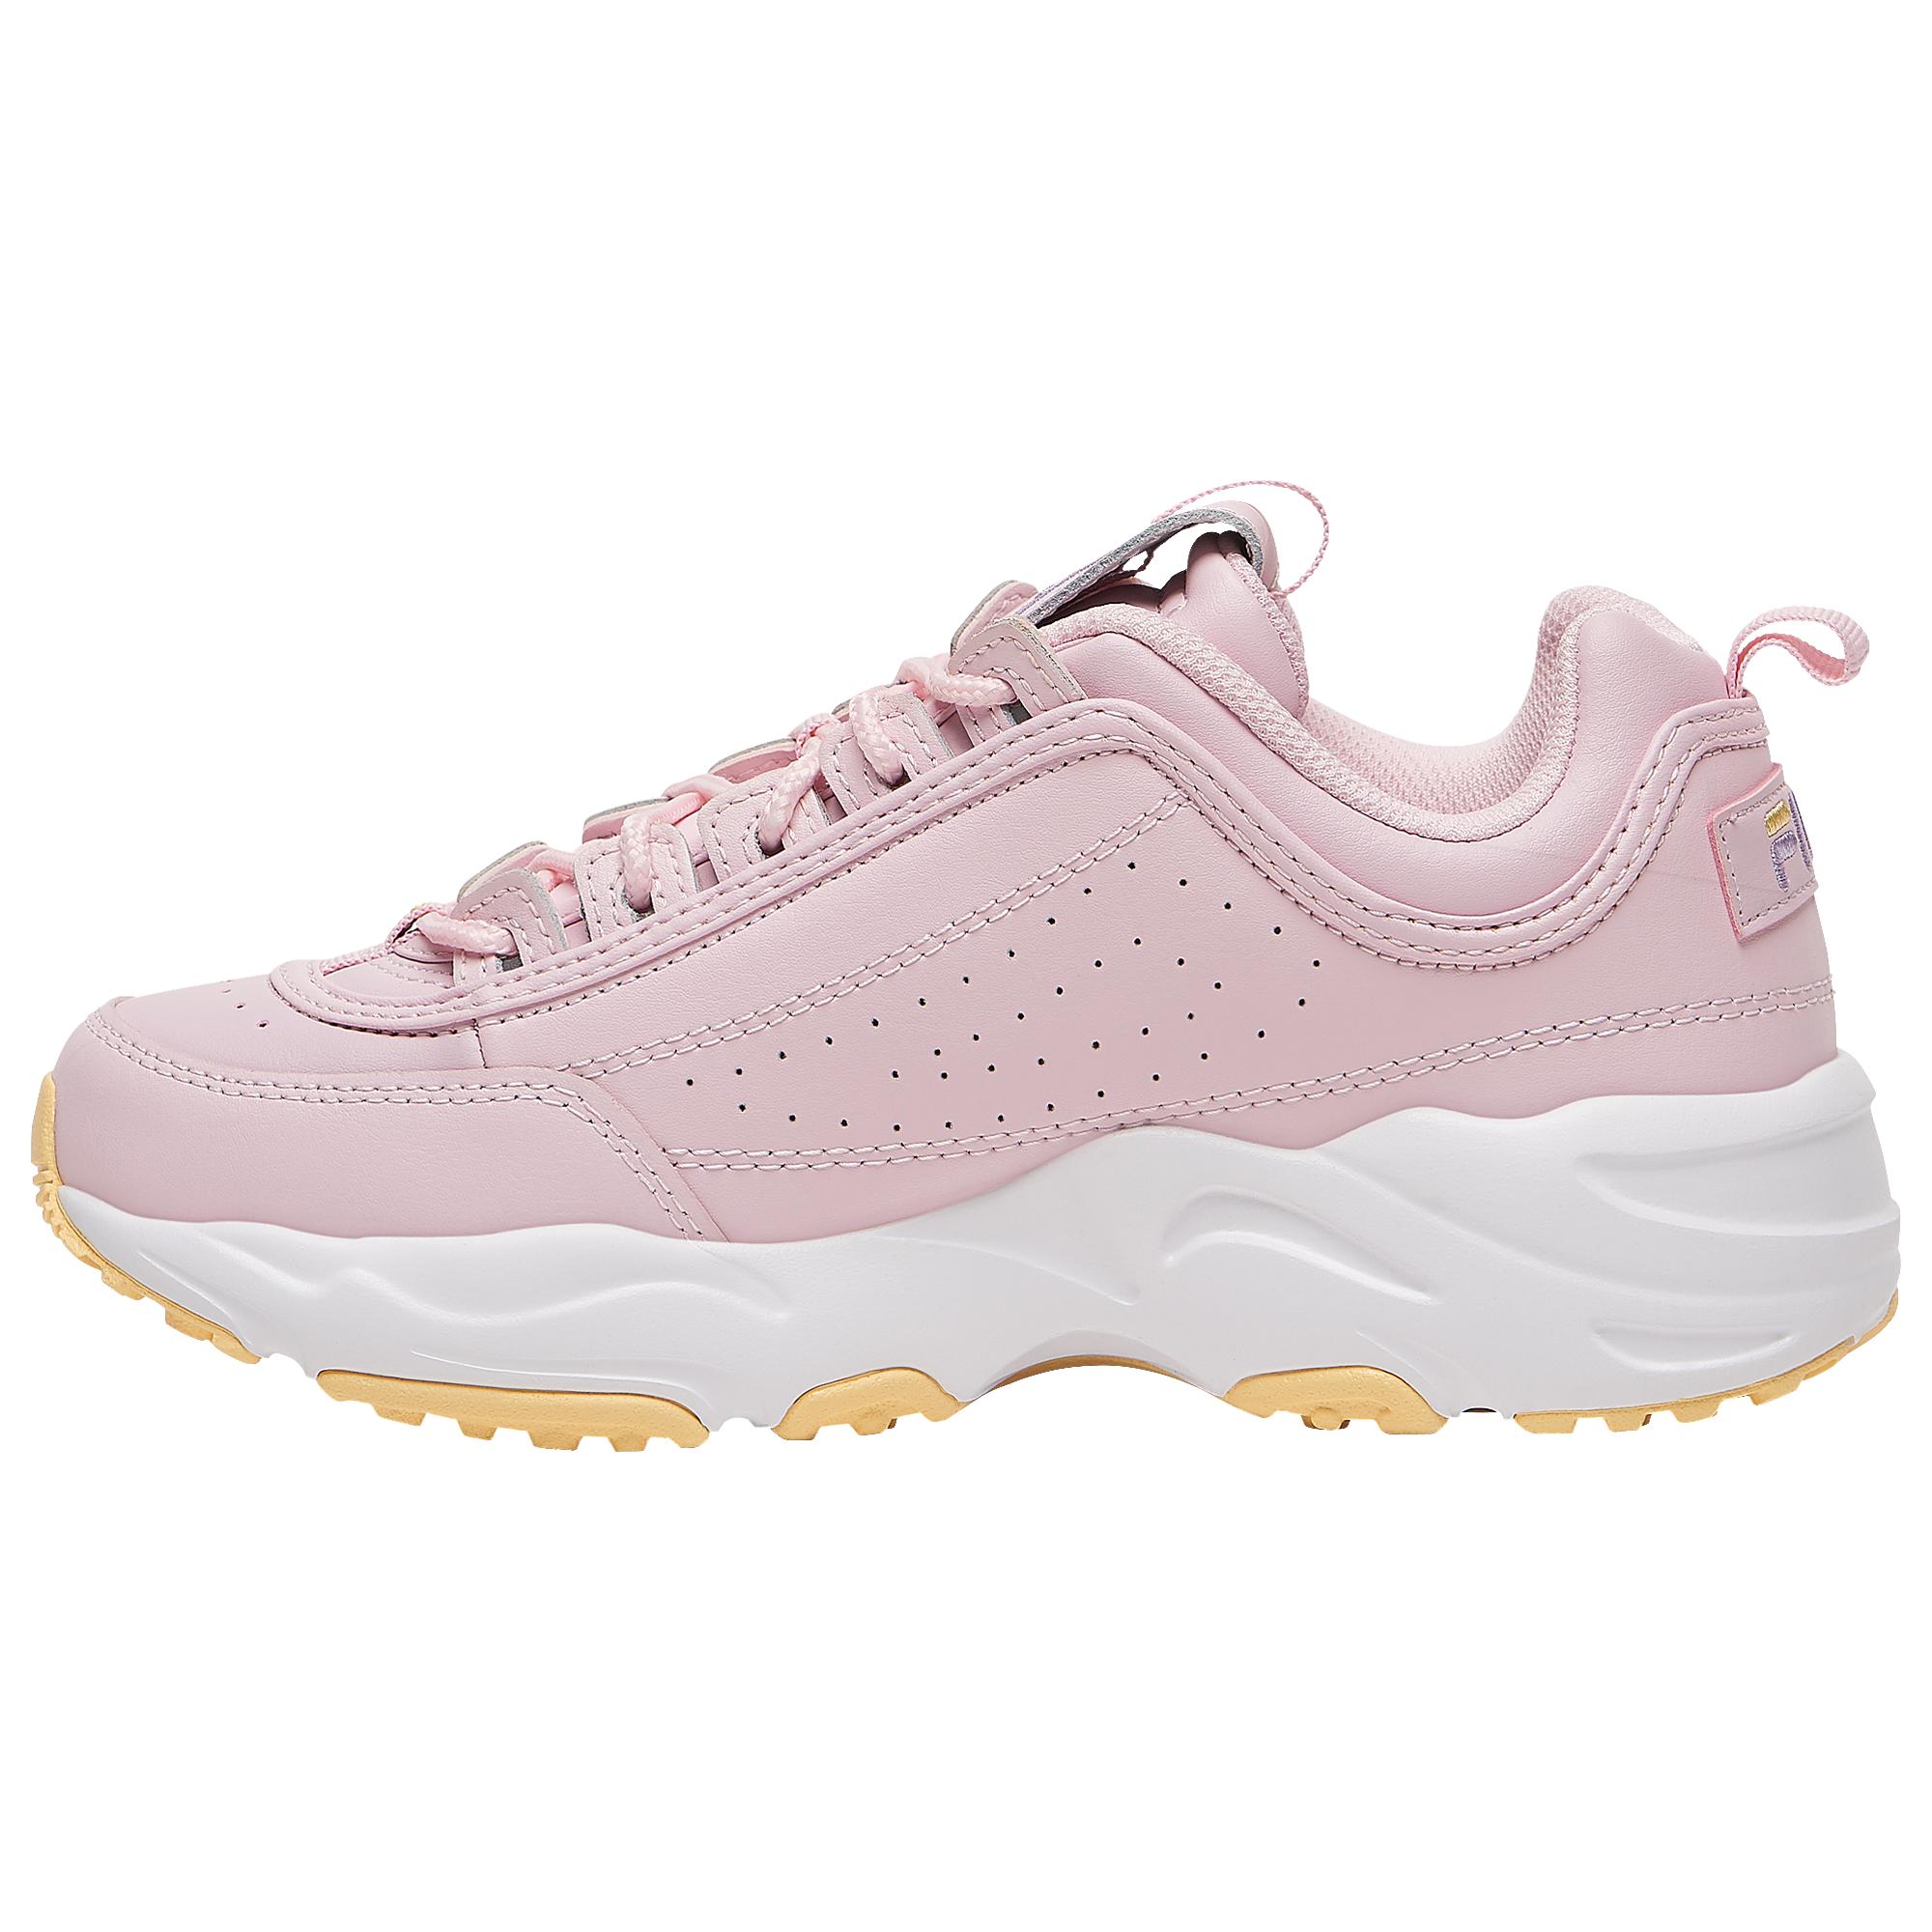 Fila Disruptor X Ray Tracer Iridescent Online Sale, UP TO 65% OFF